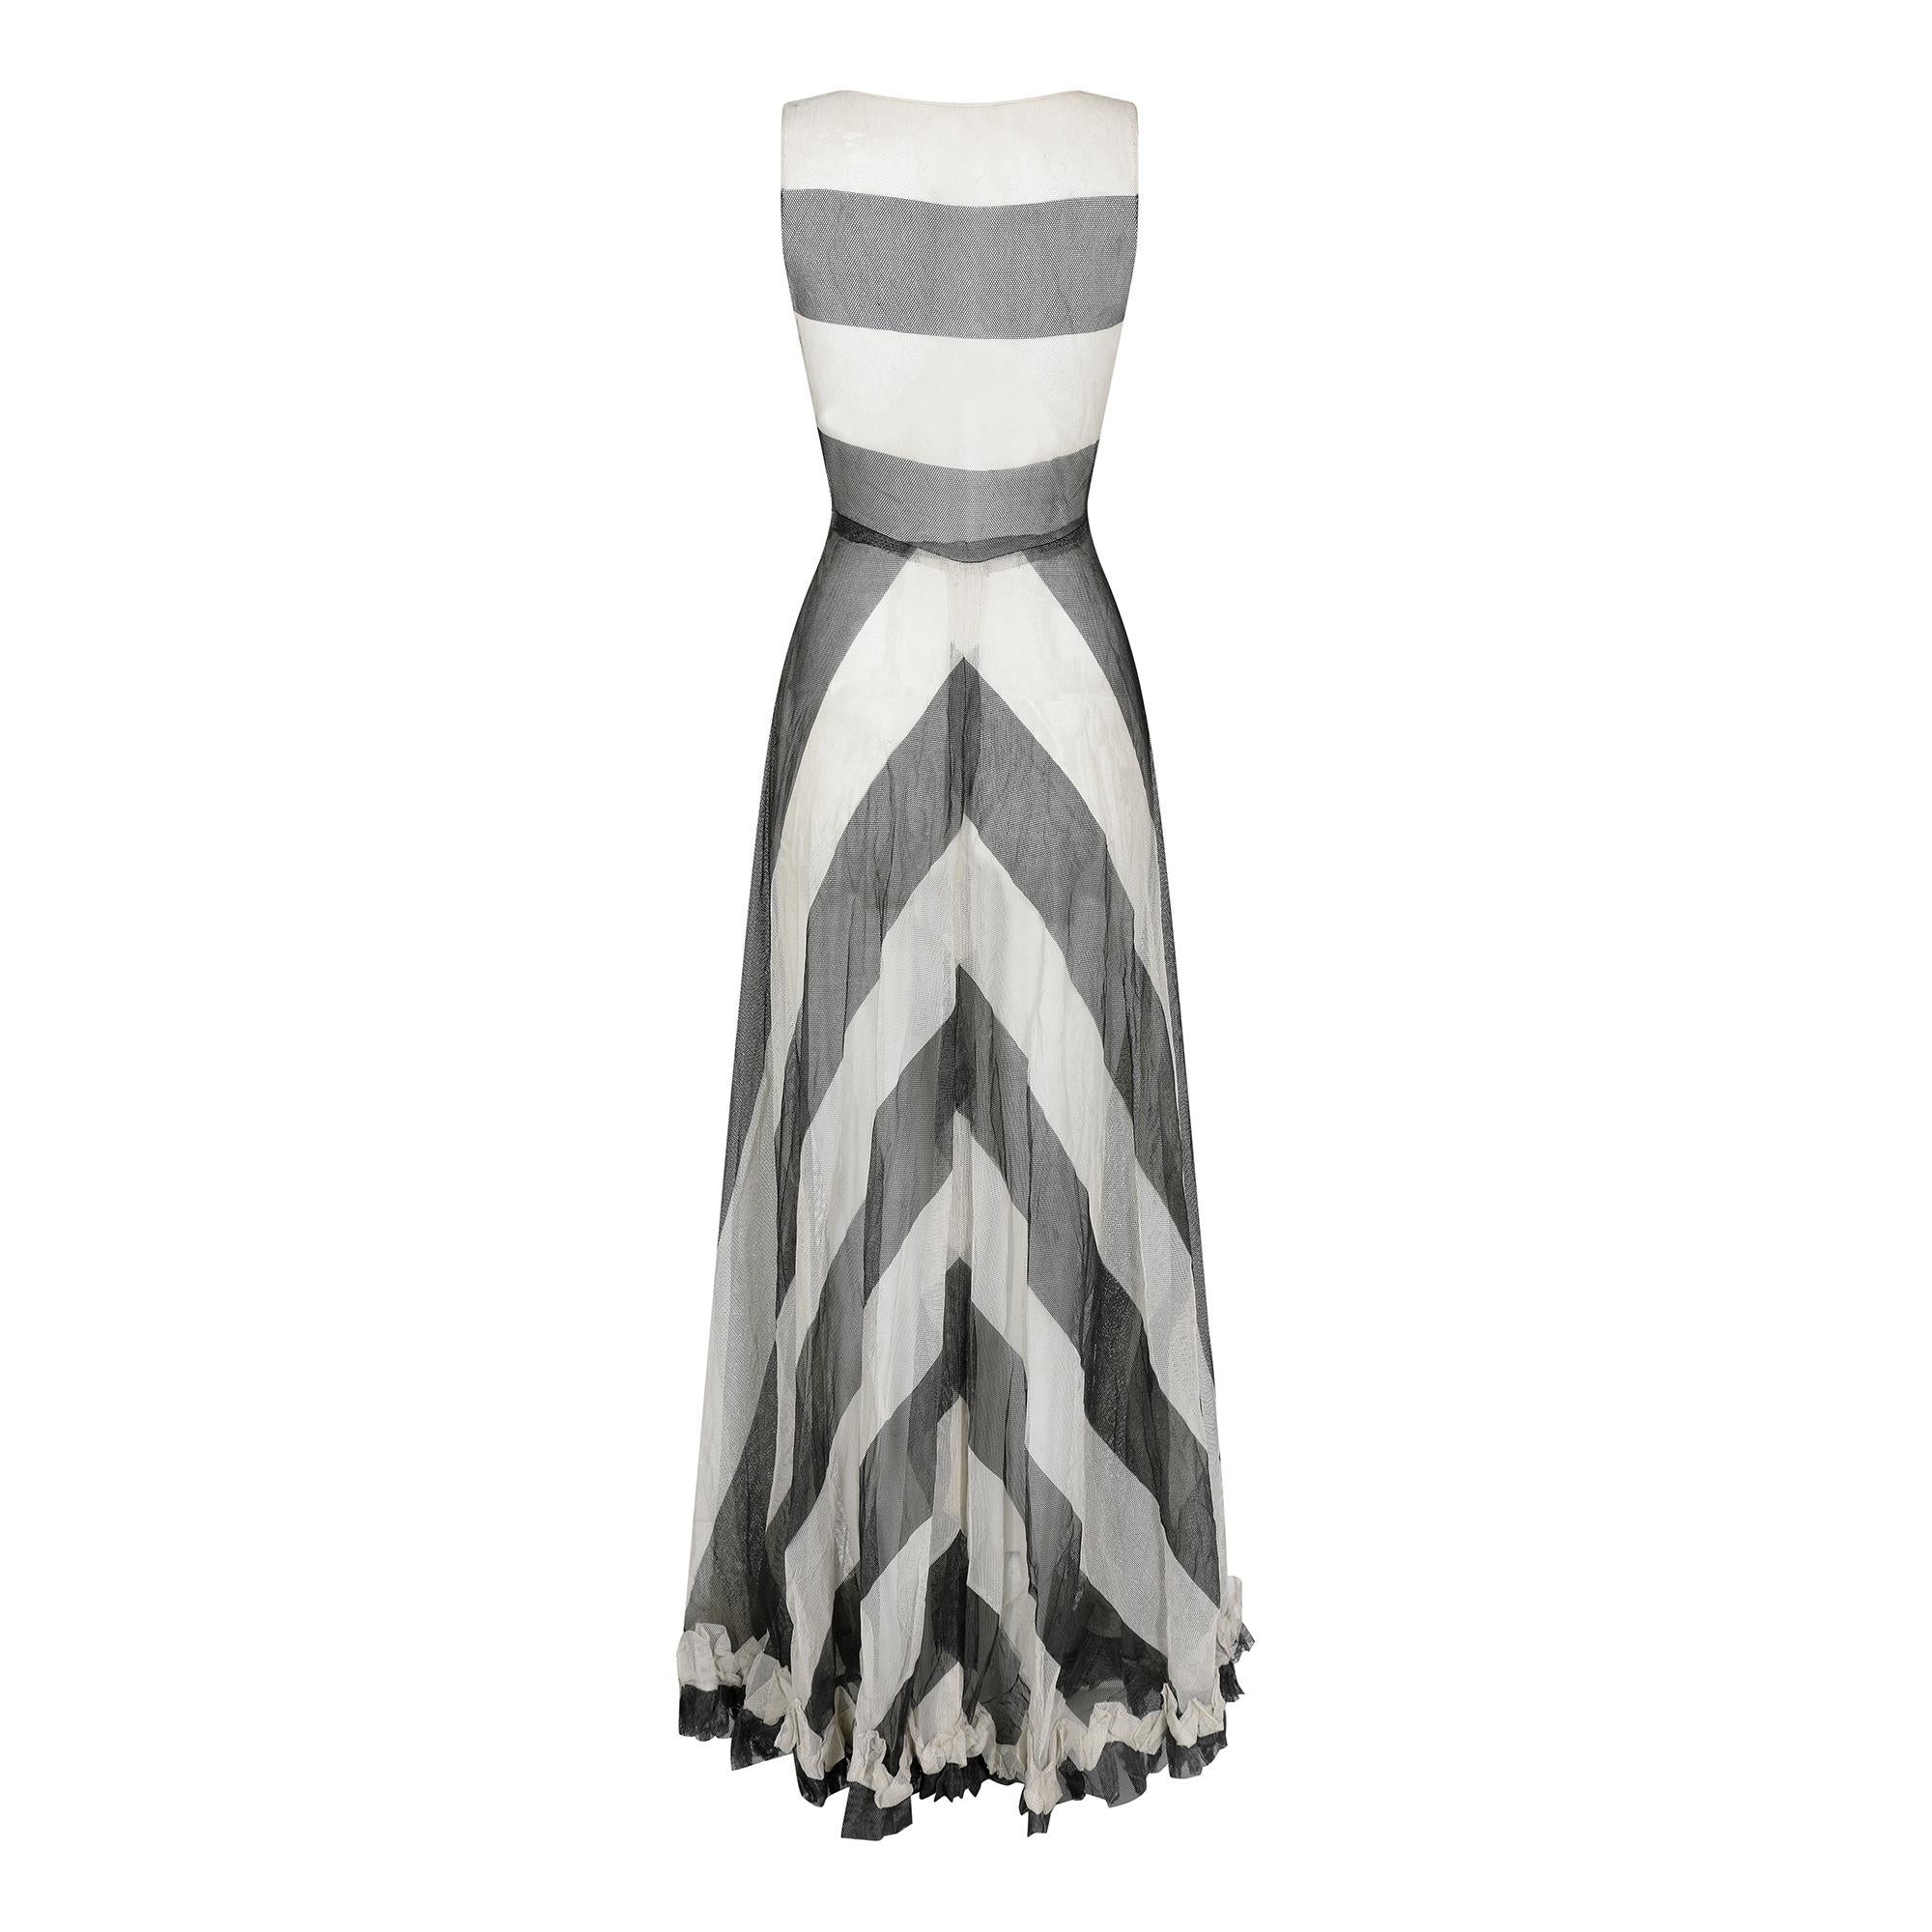 1930s Monochrome Chevron Pattern Tulle Dress In Excellent Condition For Sale In London, GB